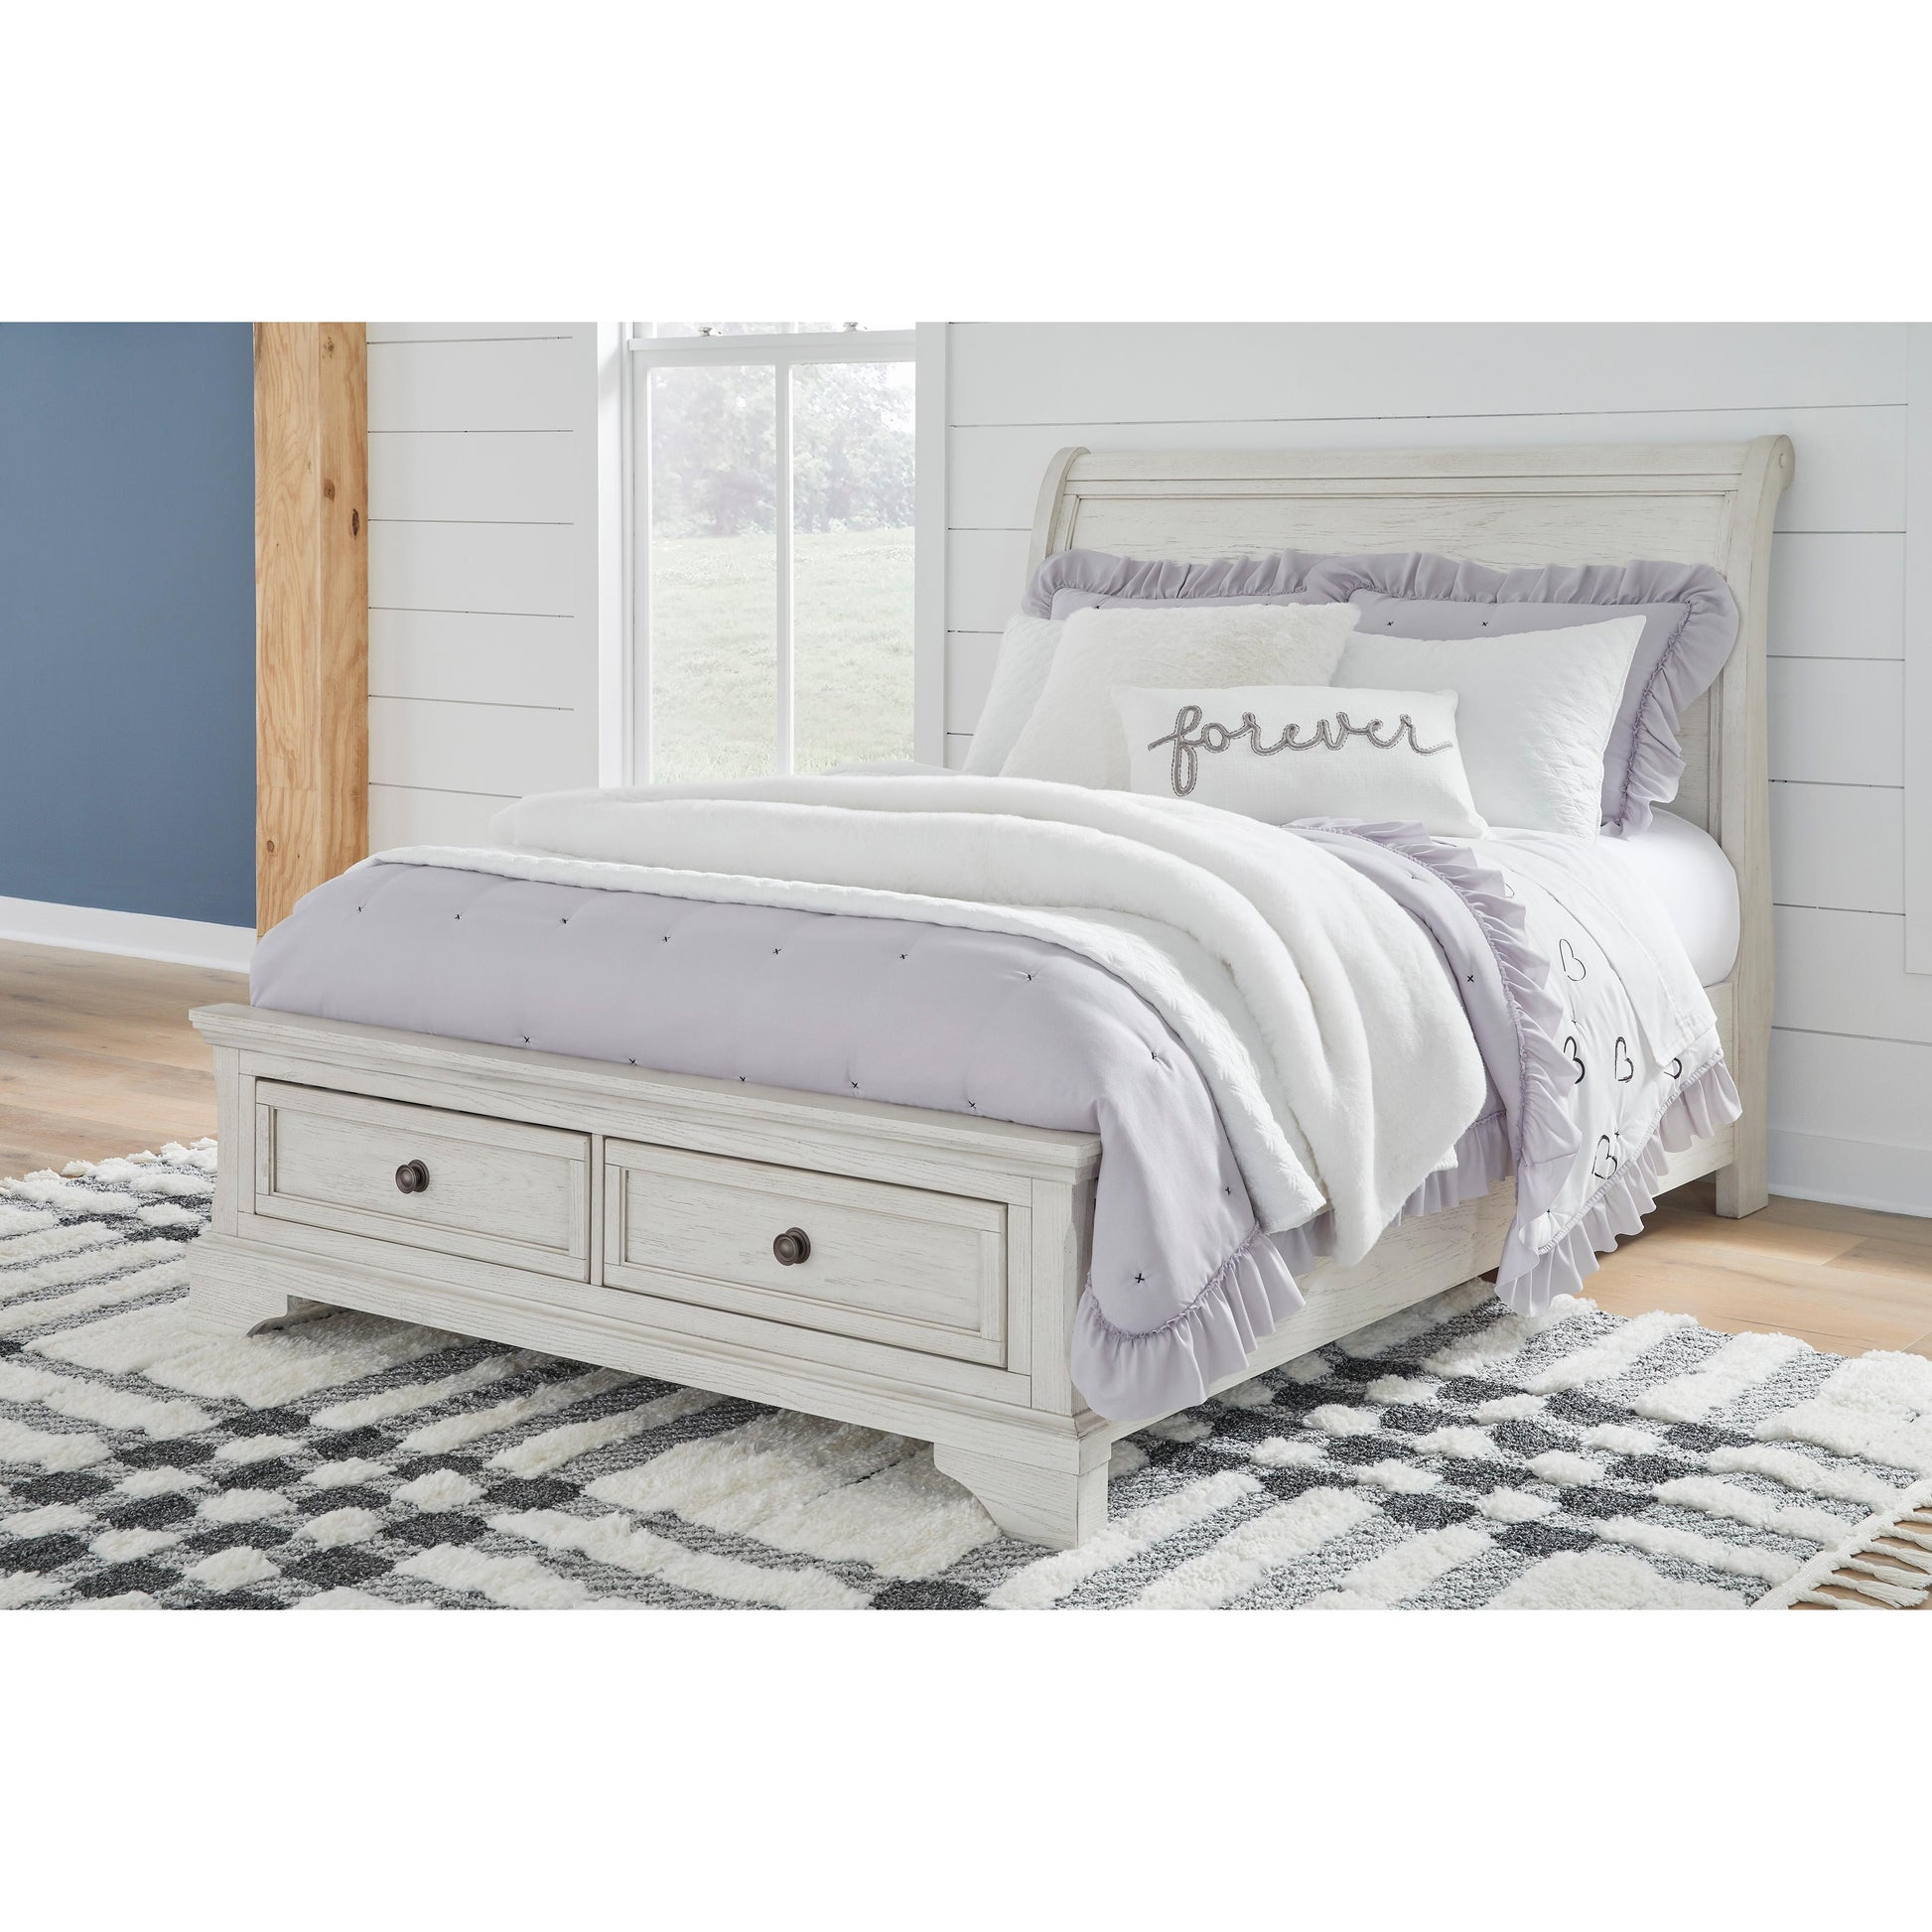 Signature Design by Ashley Kids Beds Bed B742-87/B742-84S/B742-183 IMAGE 5